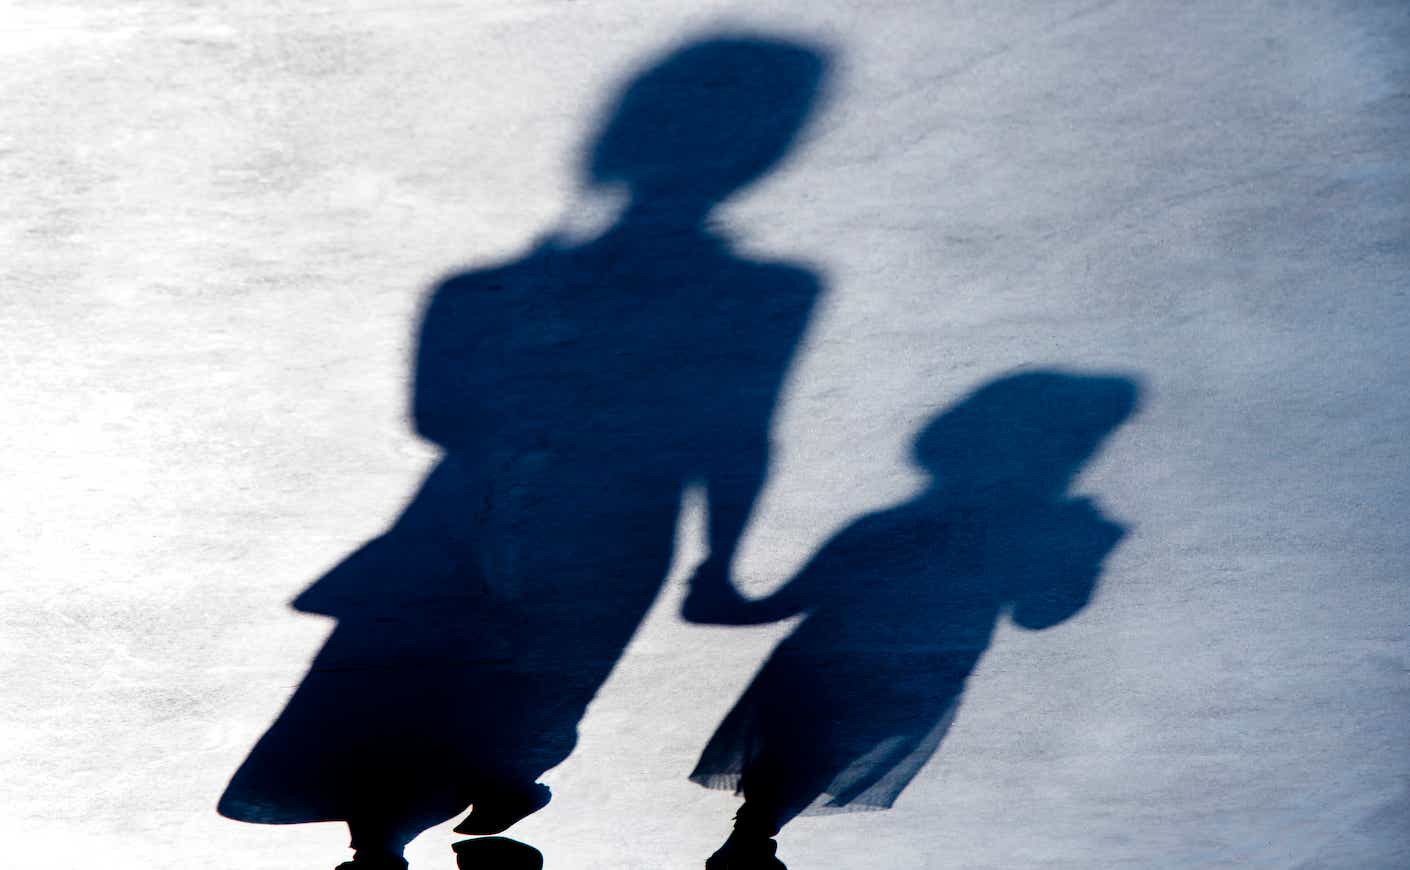 shadows of two young girls holding hands